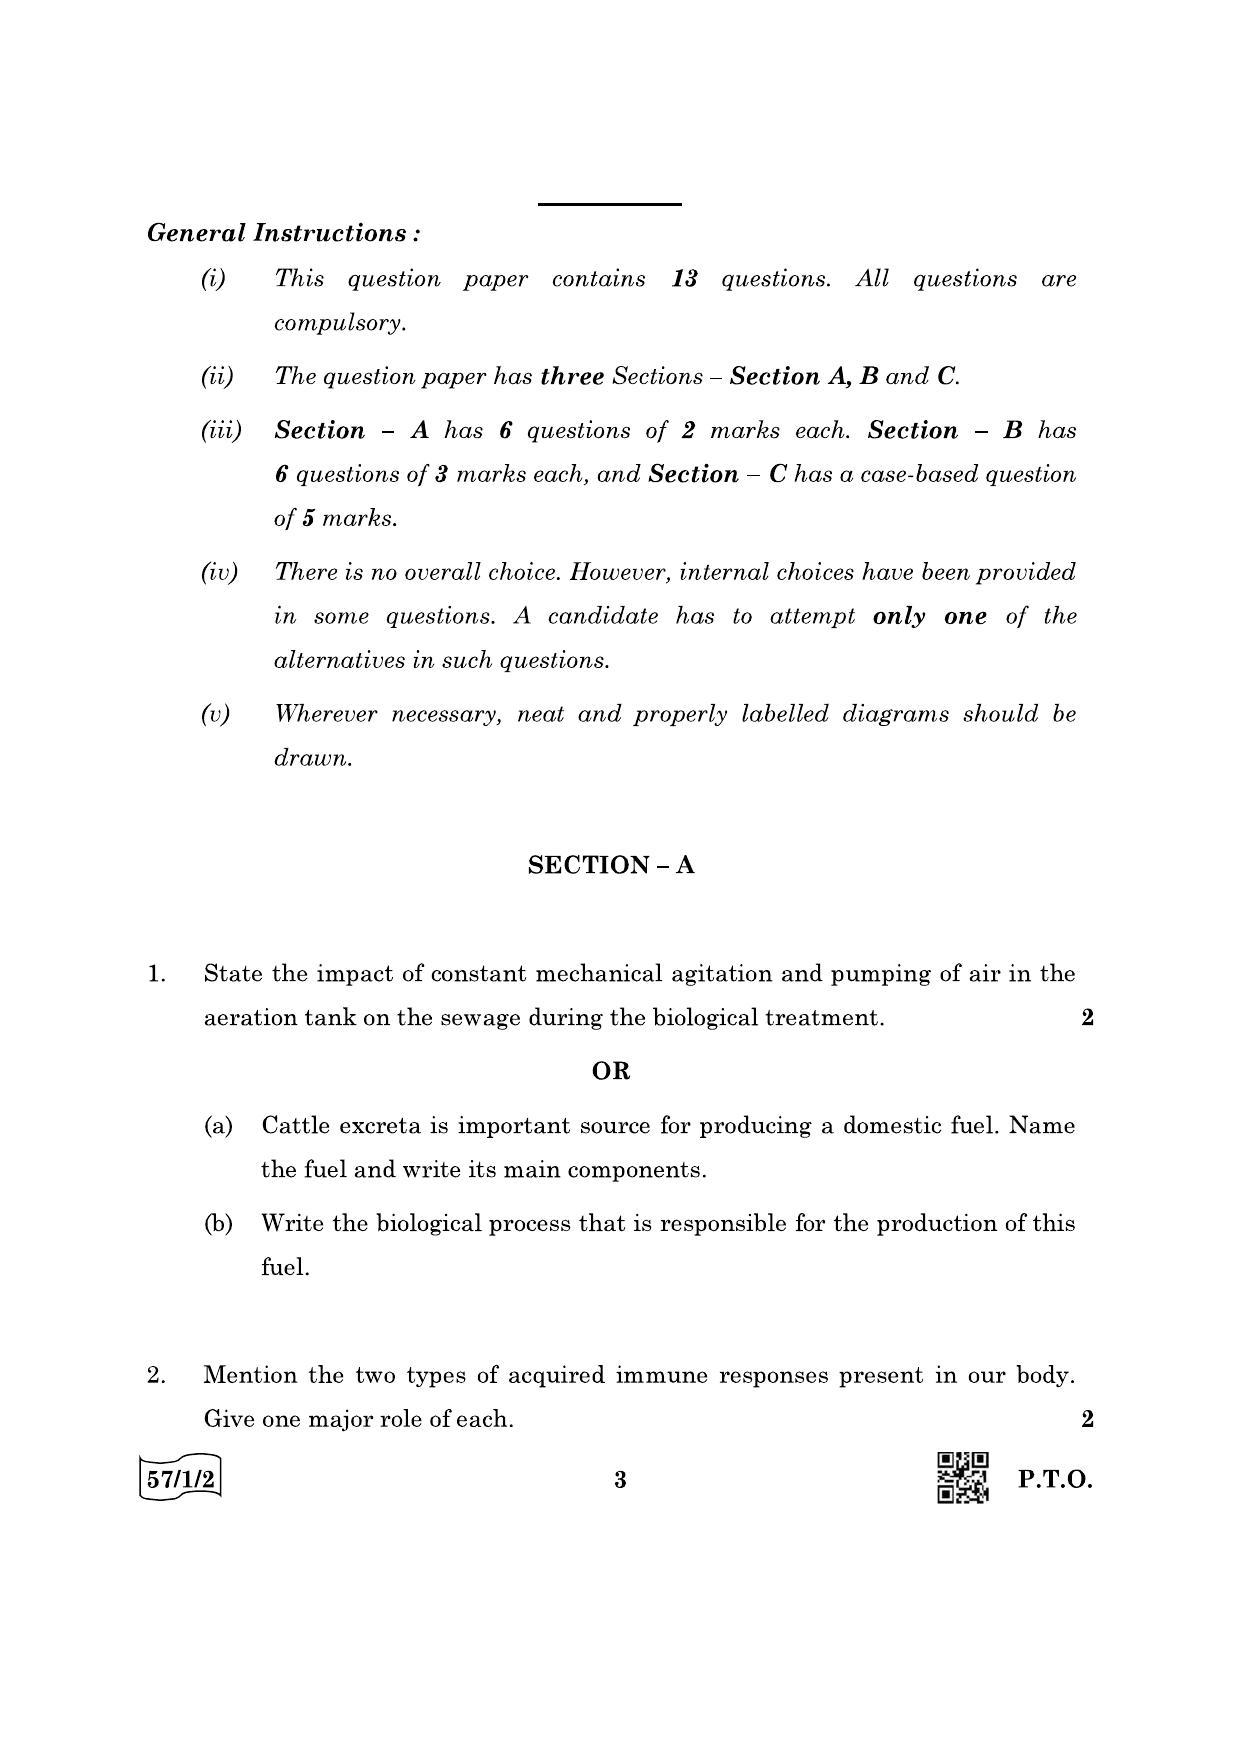 CBSE Class 12 57-1-2 Biology 2022 Question Paper - Page 3